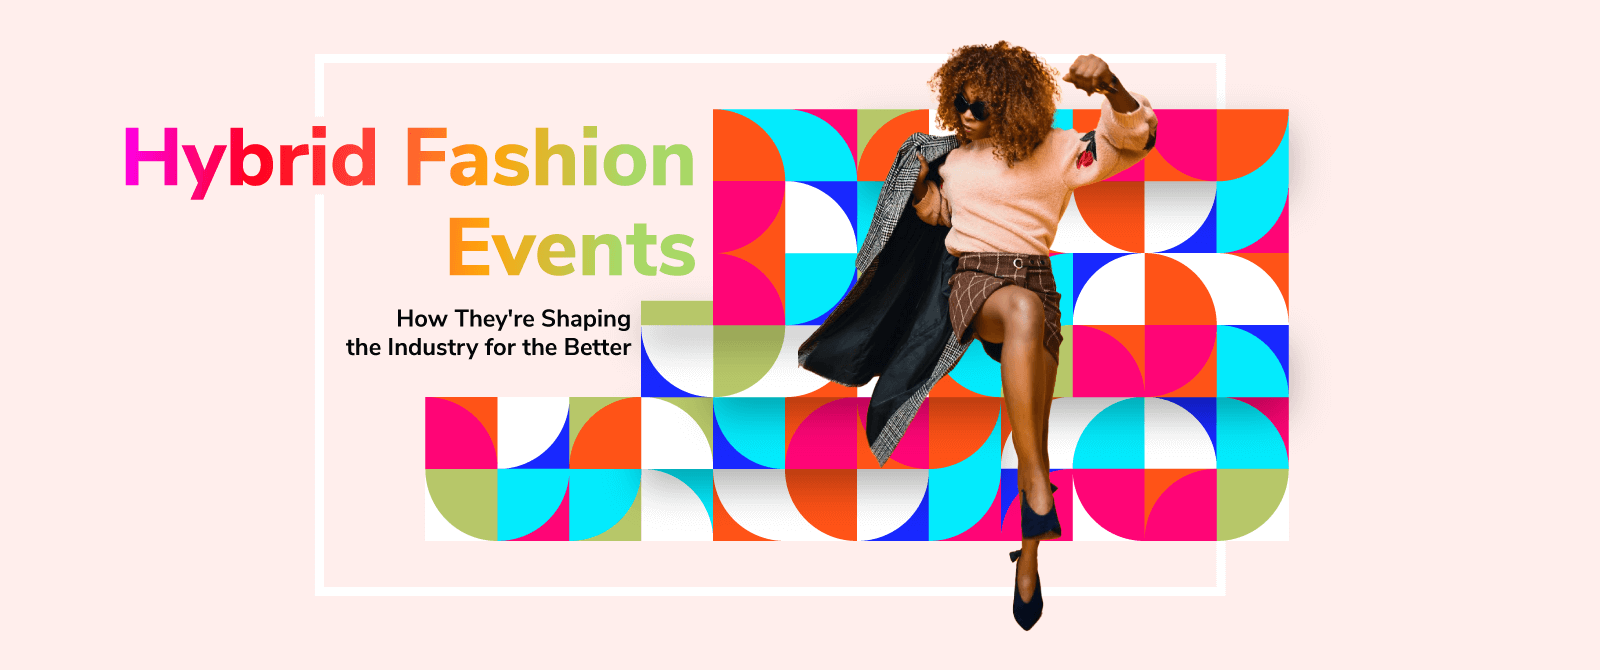 Hybrid Fashion Events: How They’re Shaping the Industry for the Better